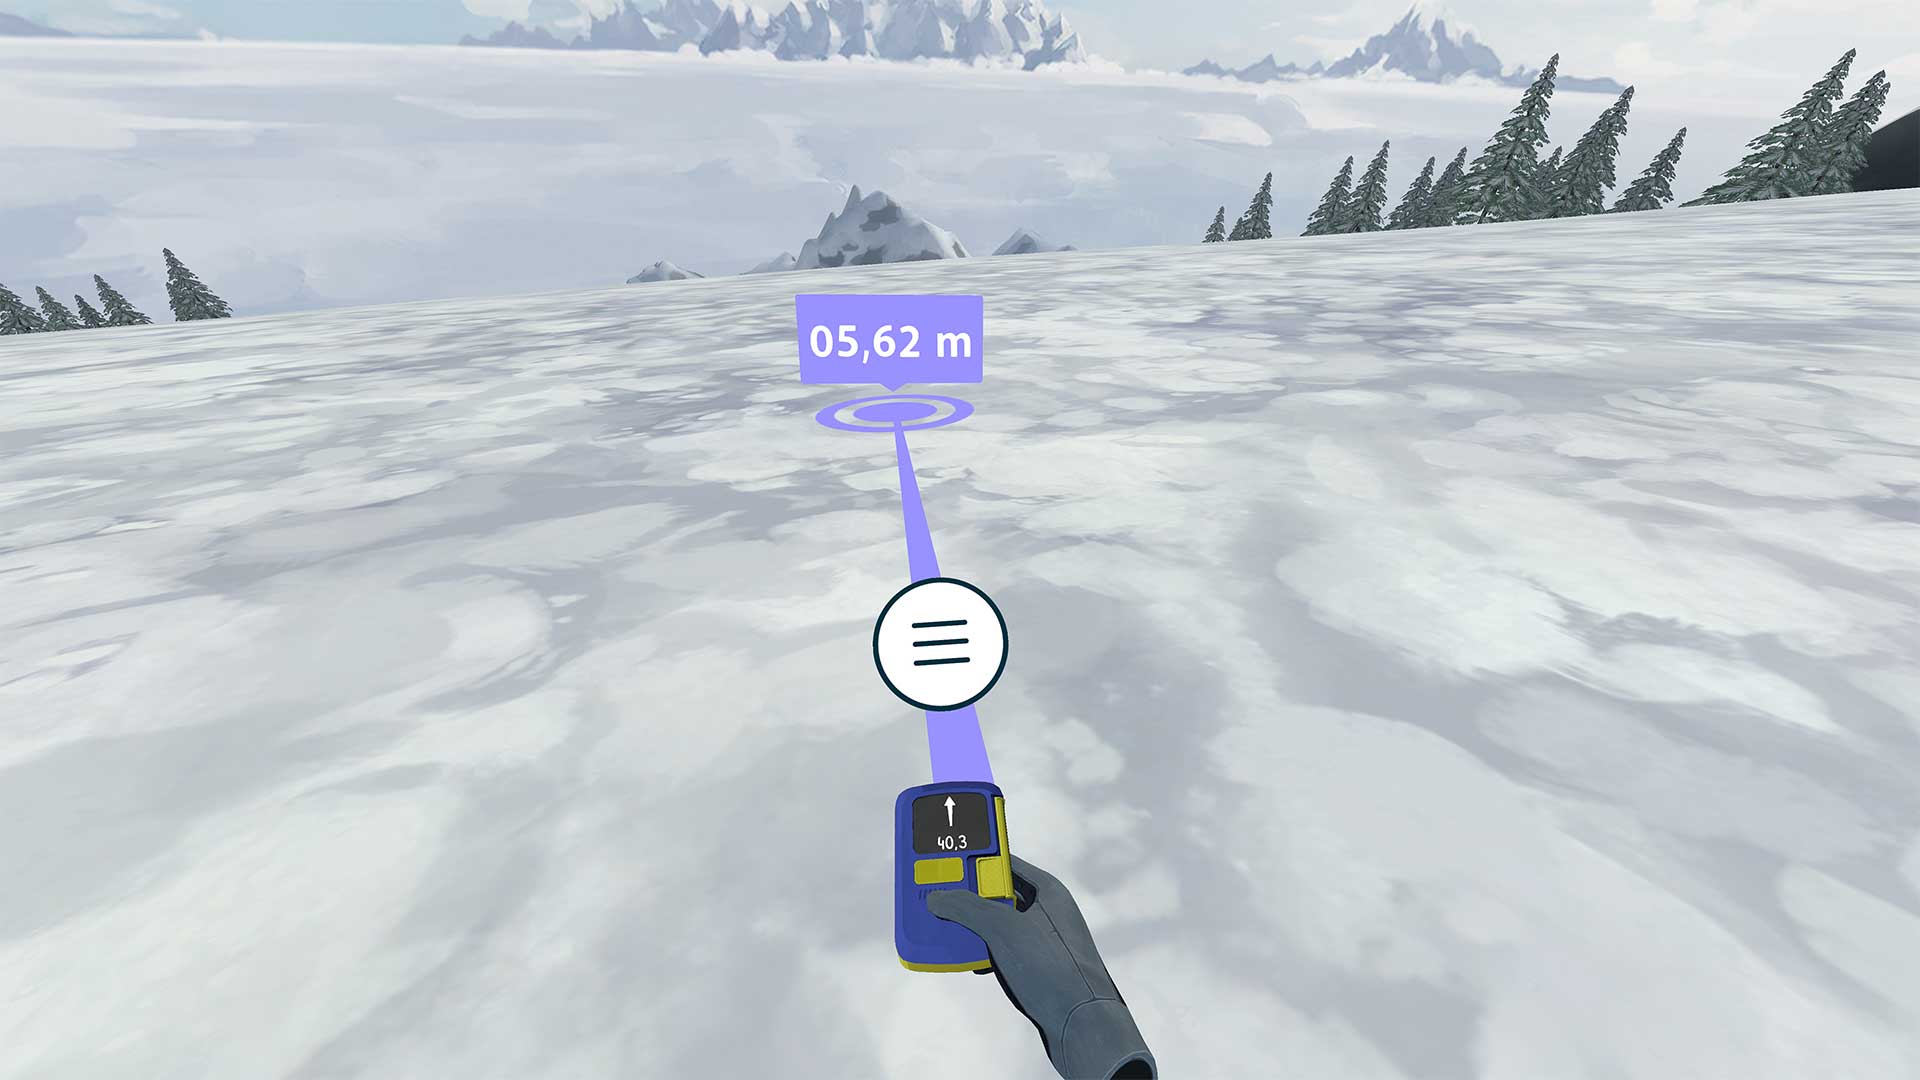 The Notfall Lawine VR app allows users to experience and learn how to perform a successful avalance rescue.